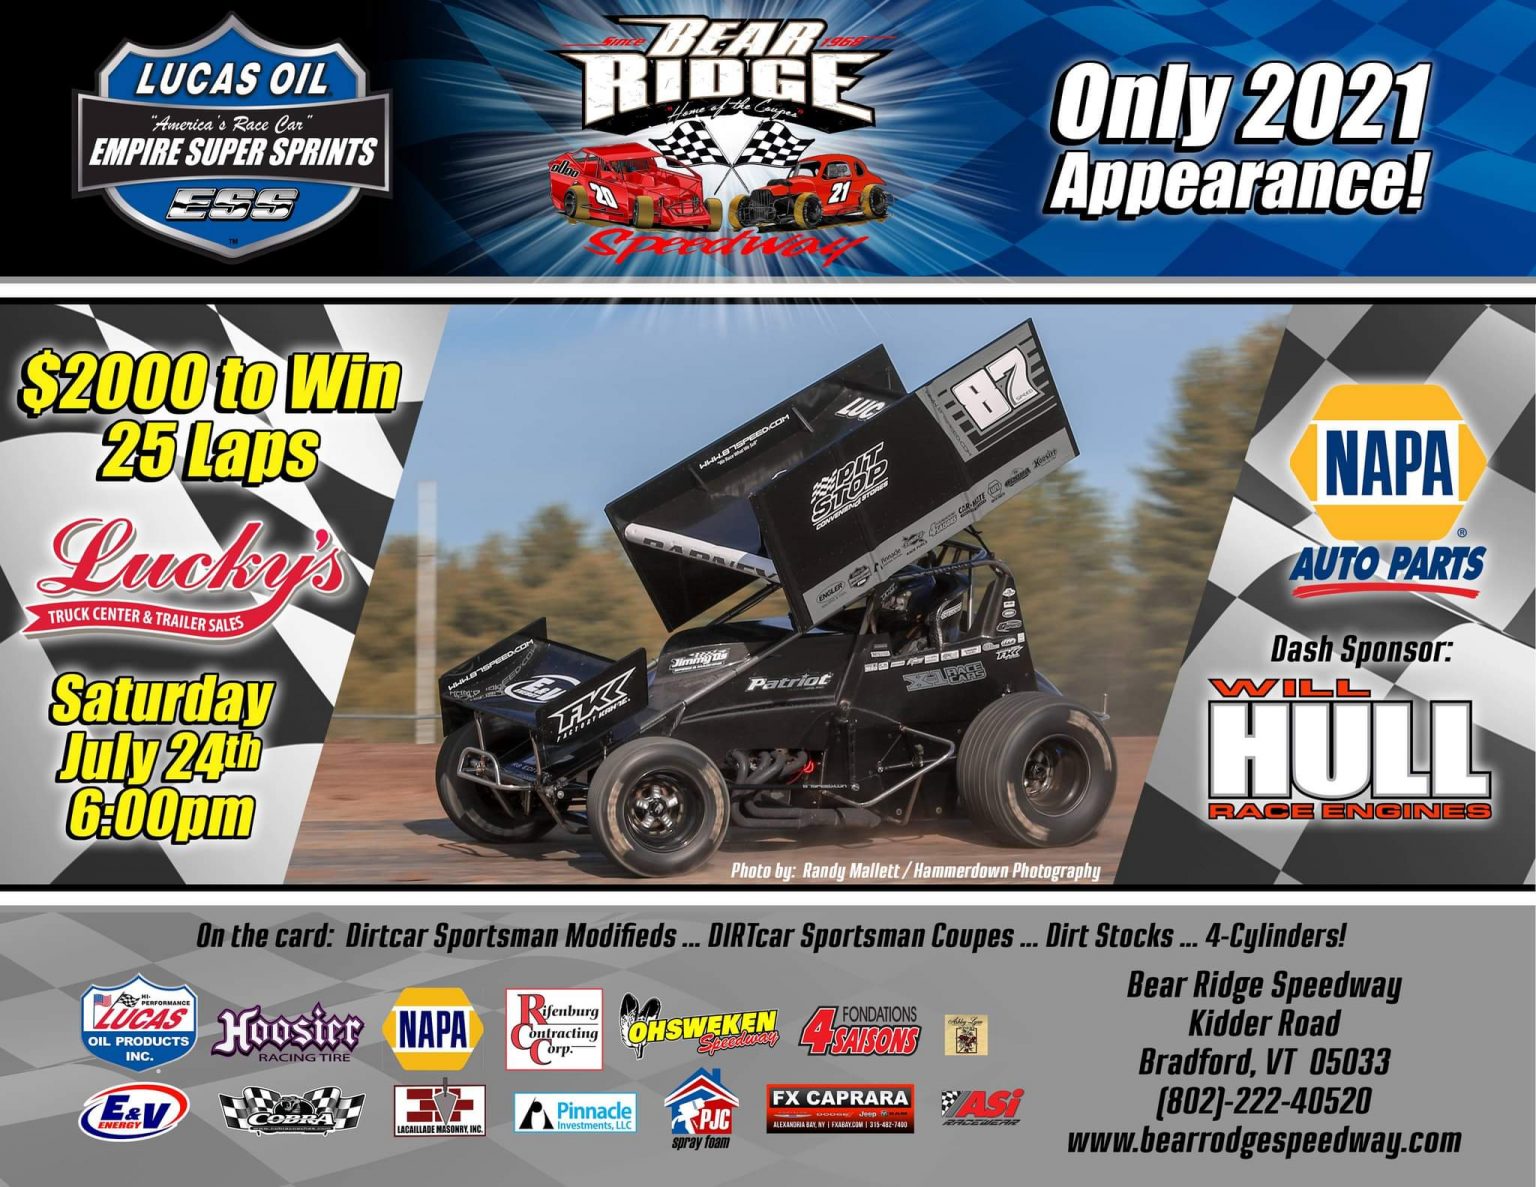 Less than 24 hours until the EMPIRE SUPER SPRINTS start to INVADE the